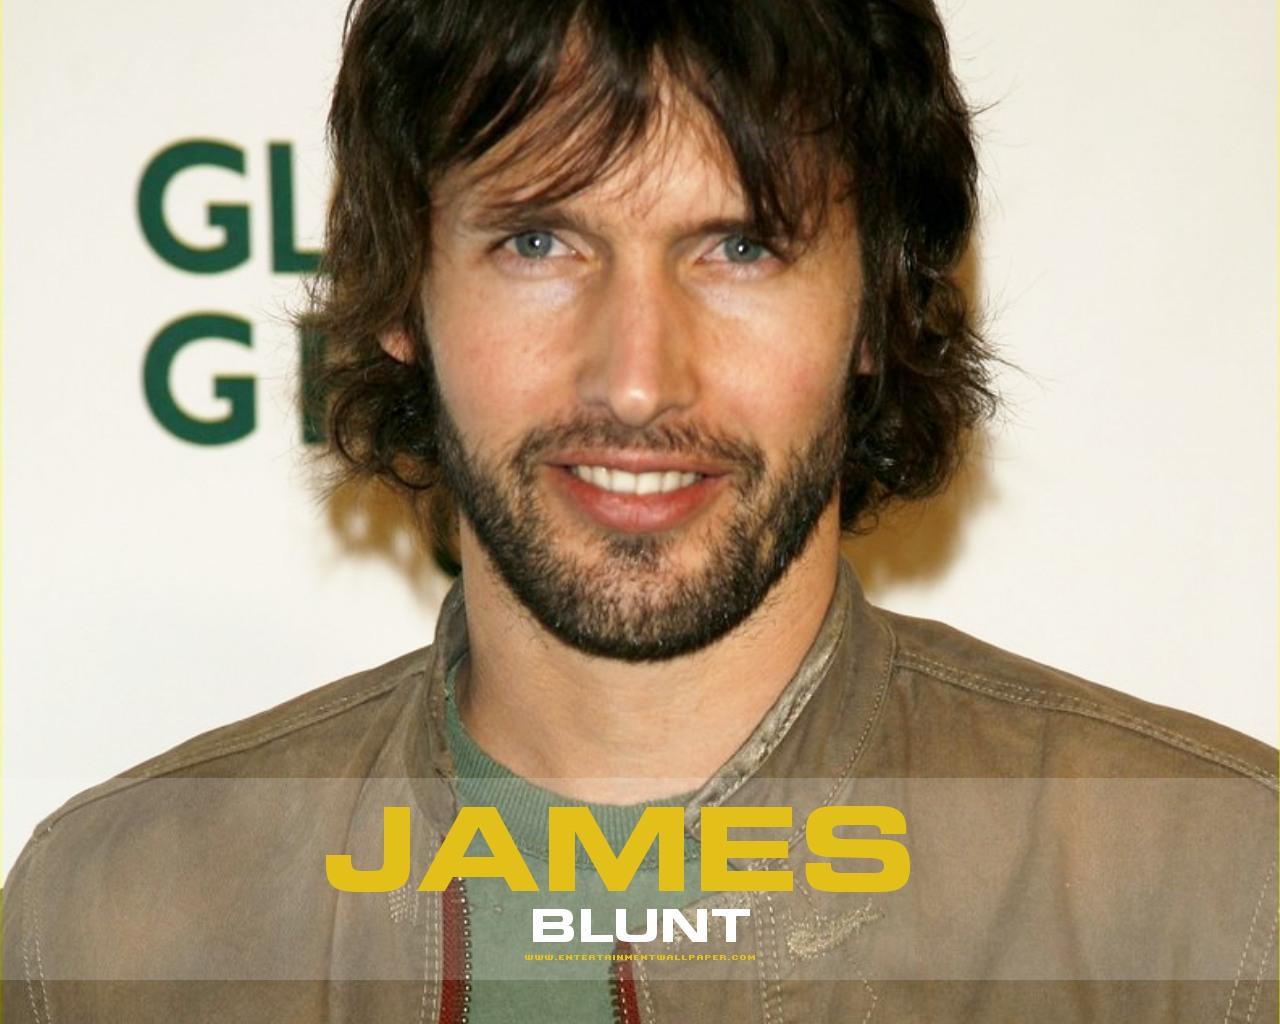 EXCELLENT VINTAGE BLACK AND WHITE WALLPAPER OF JAMES BLUNT - WALLPAPER-OF-JAMES-BLUNT